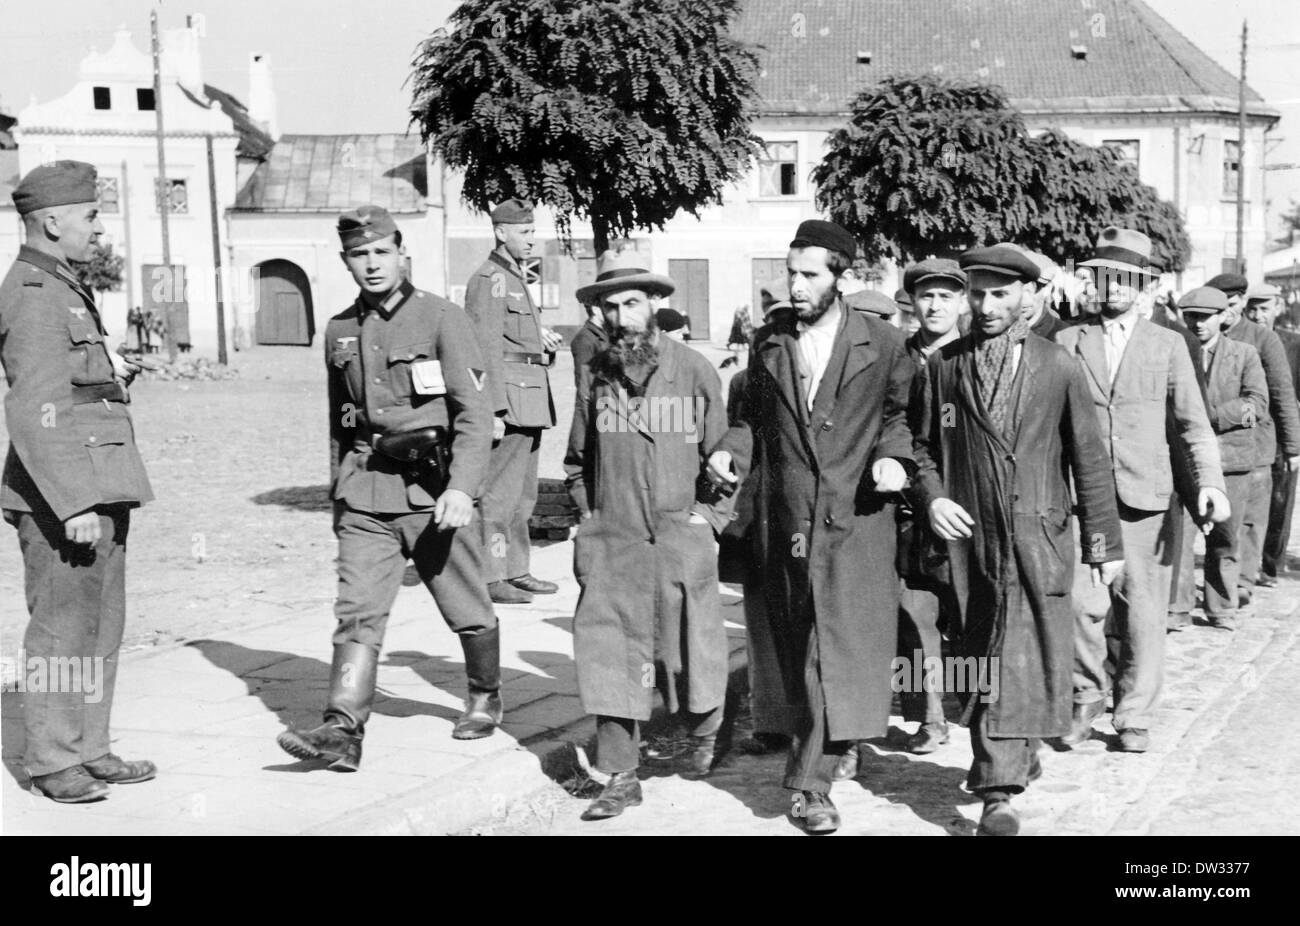 After the occupation of Poland by the German Wehrmacht - Jewish citizens from Lowiez are led by German soldiers to work as forced laborers, October 1939, location unknown. Fotoarchiv für Zeitgeschichte / NO WIRE SERVICE Stock Photo